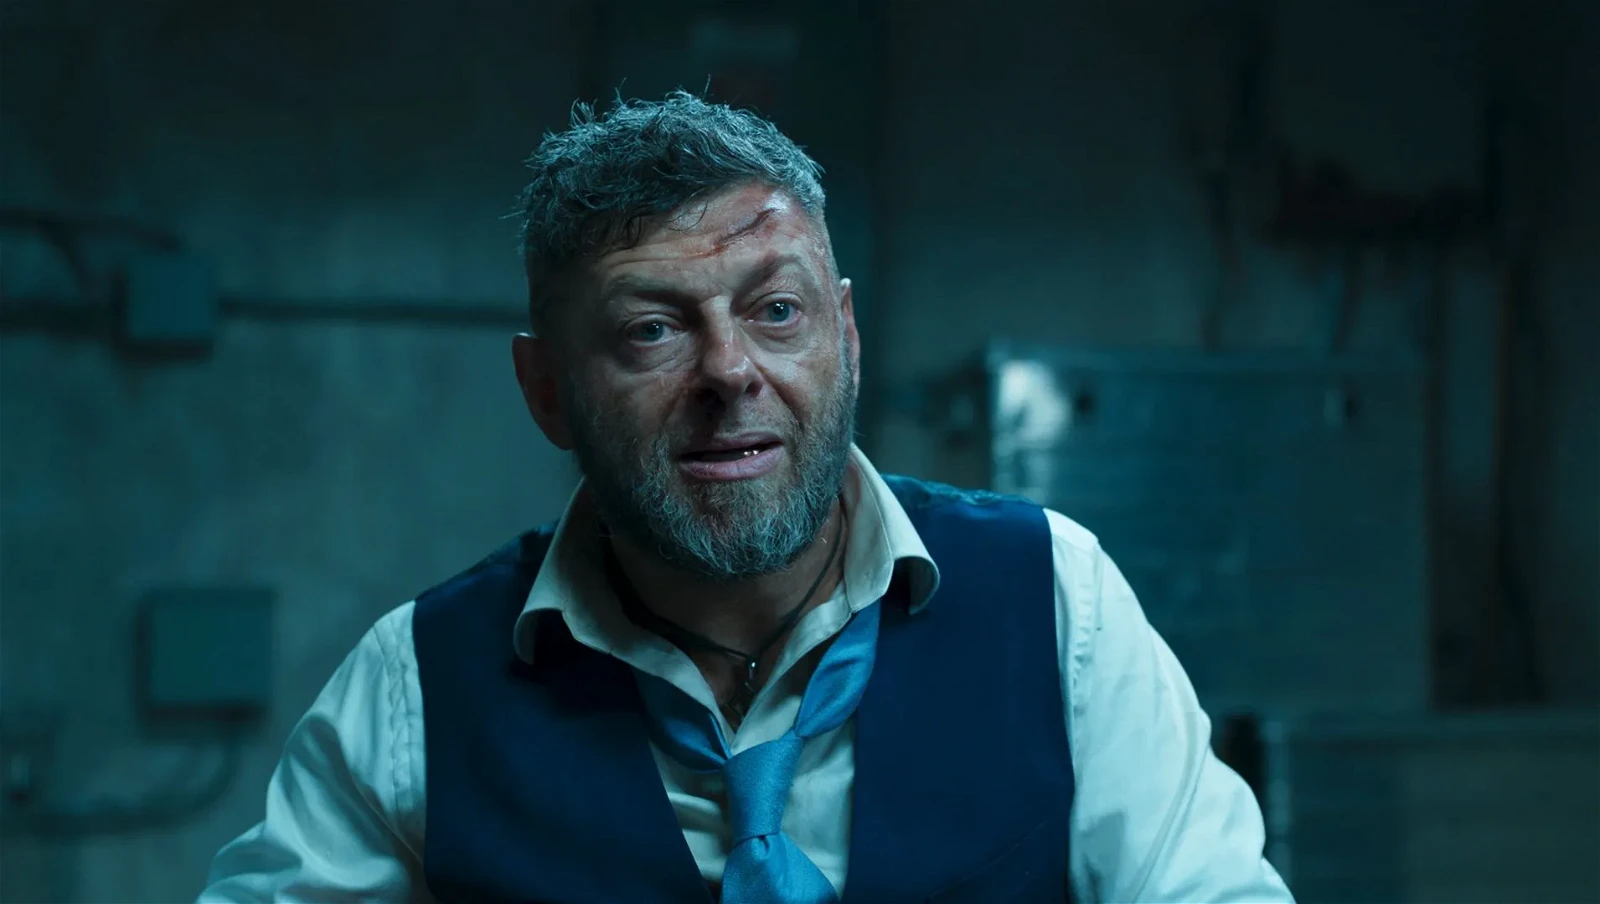 Venom: Let There Be Carnage director Andy Serkis